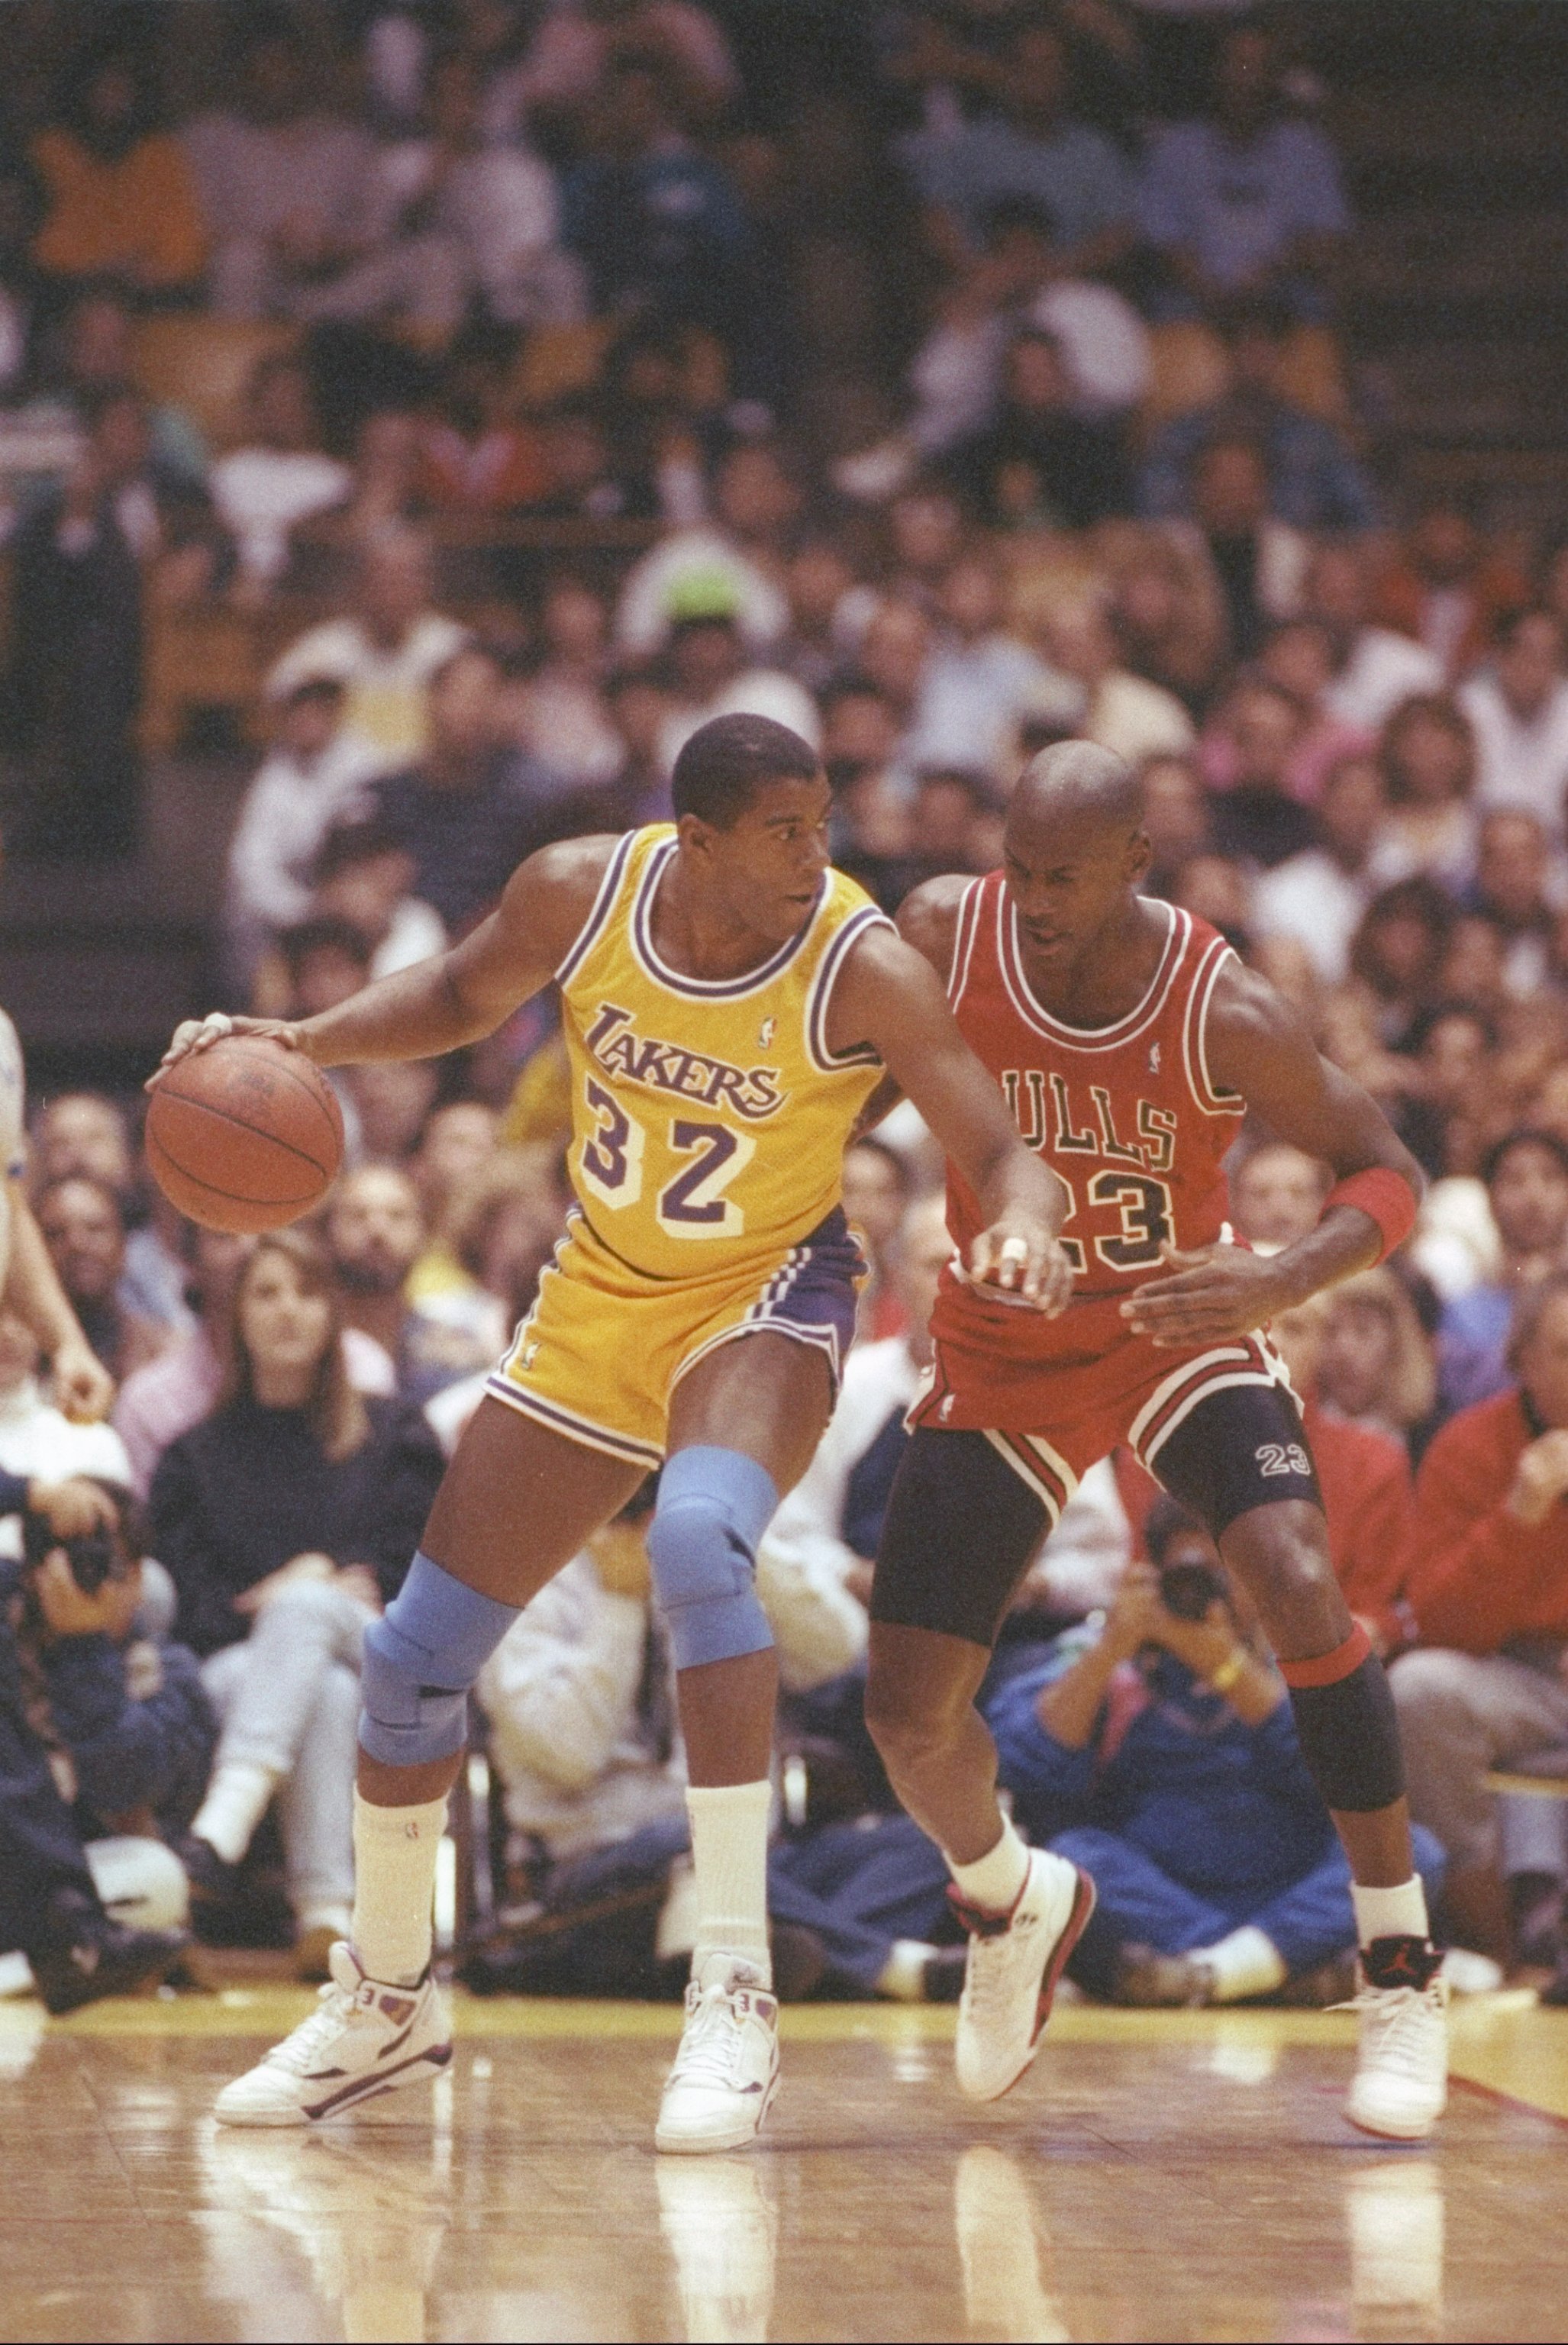 3 Feb 1991: Guard Erving Johnson of the Los Angeles Lakers dribbles the ball as guard Michael Jordan of the Chicago Bulls defends him during a game at the Great Western Forum in Inglewood, California.